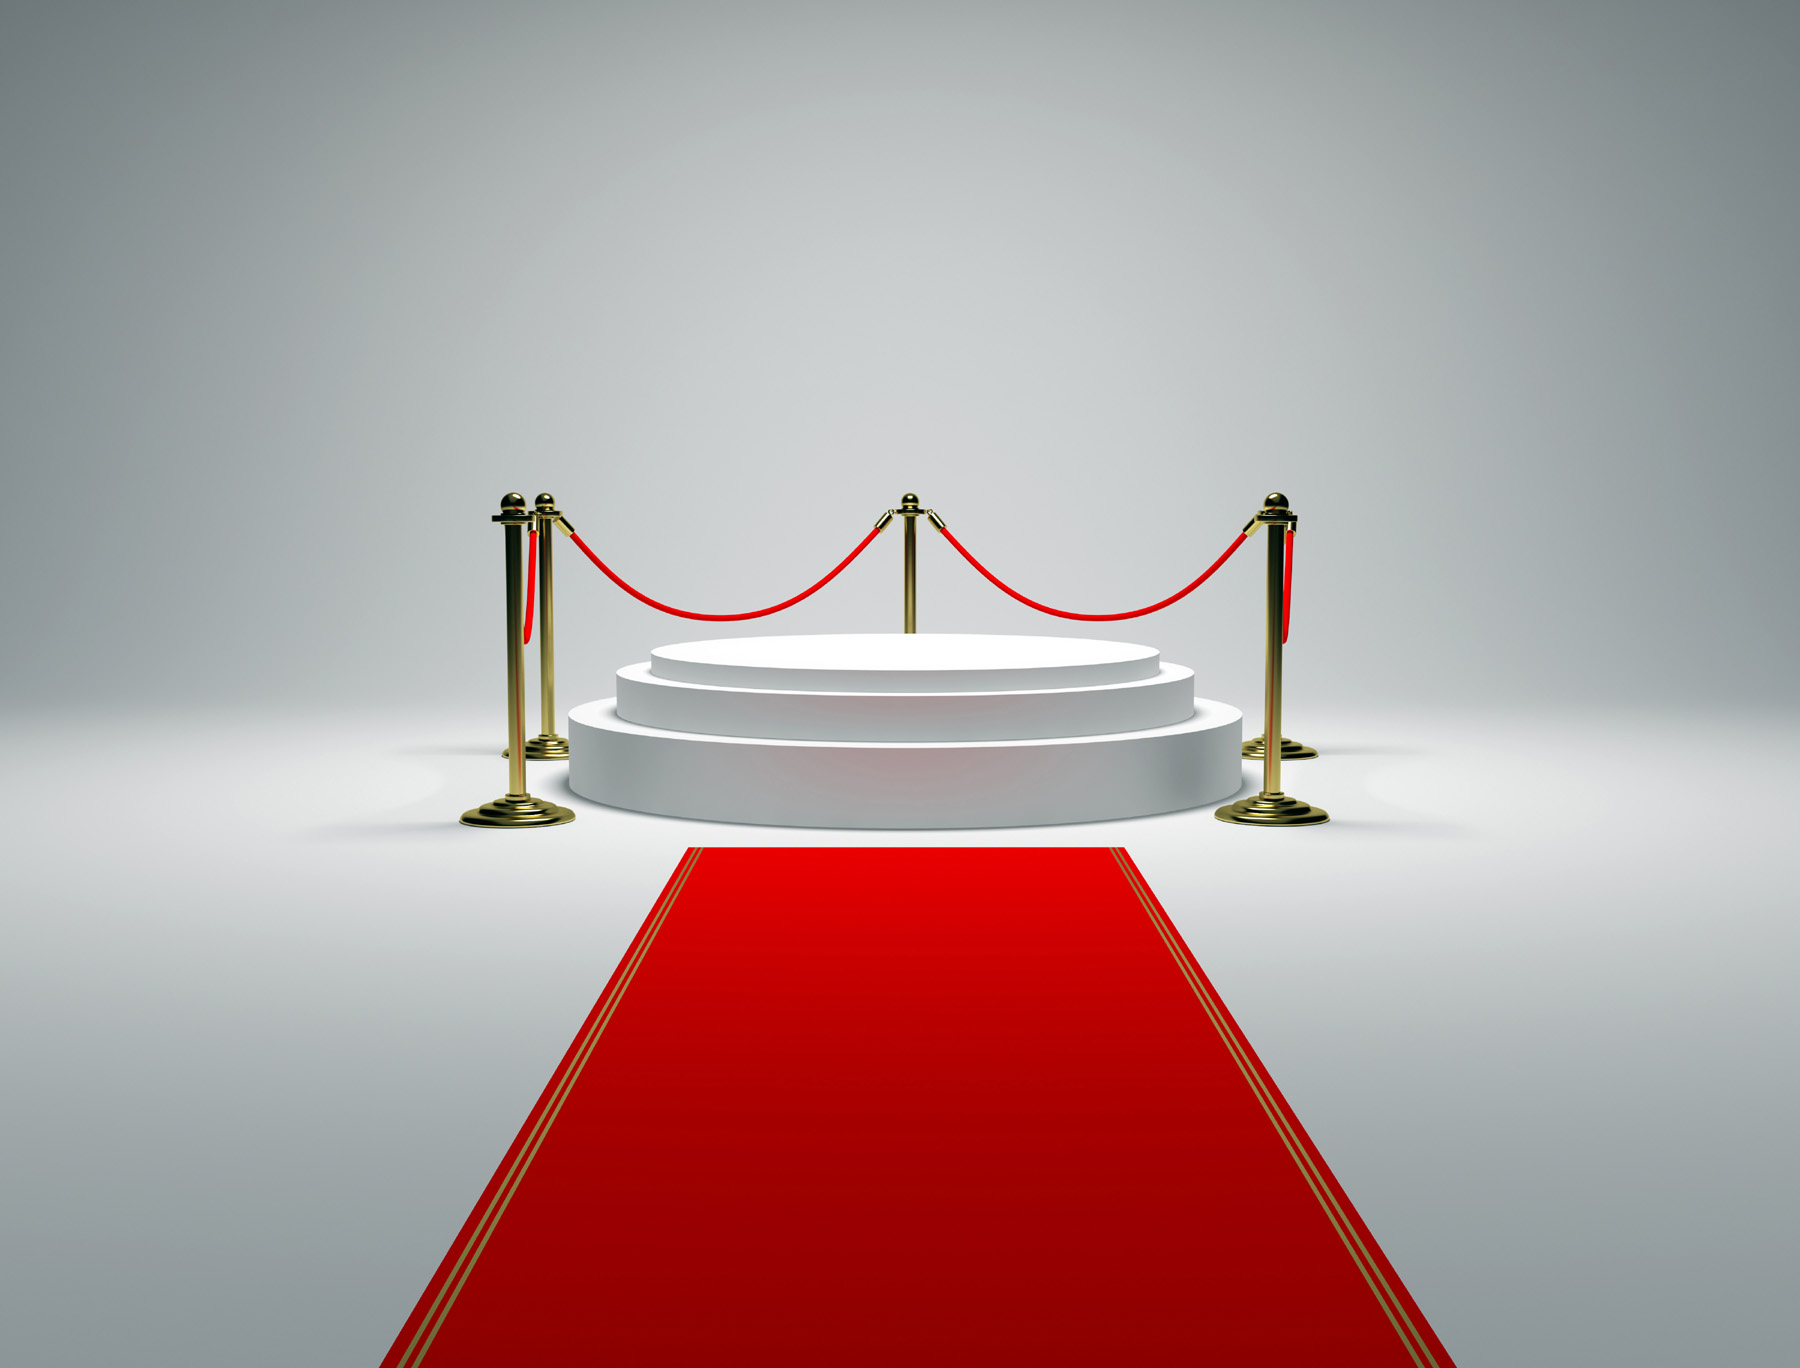 Circular booth with guardrails on the red carpet 49947 - Stage ...